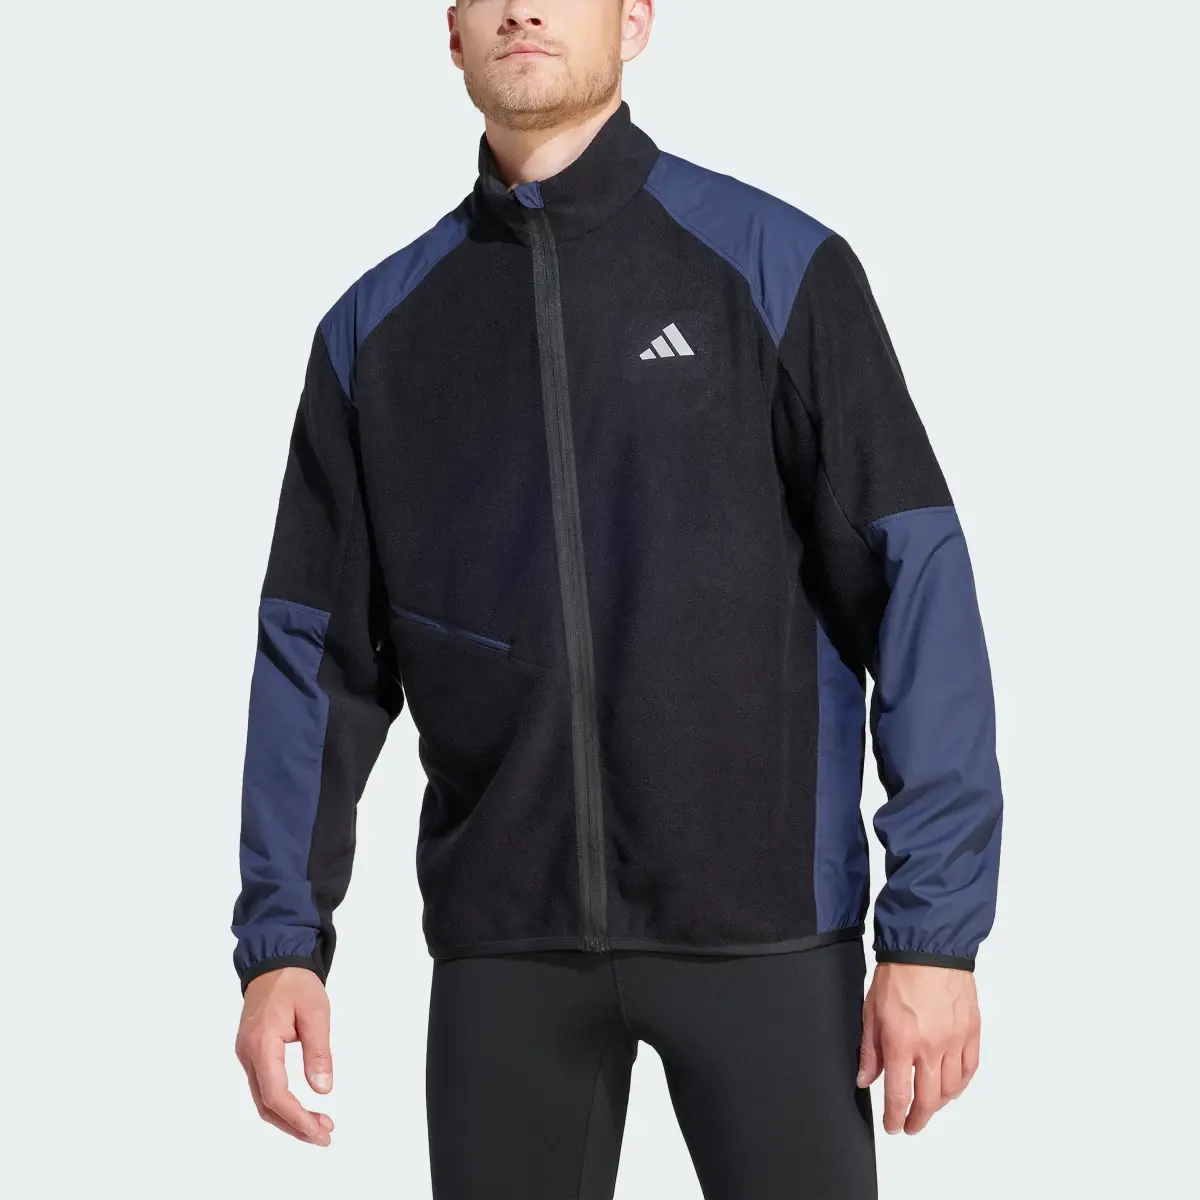 Adidas Ultimate Running Conquer the Elements Jacke. 1